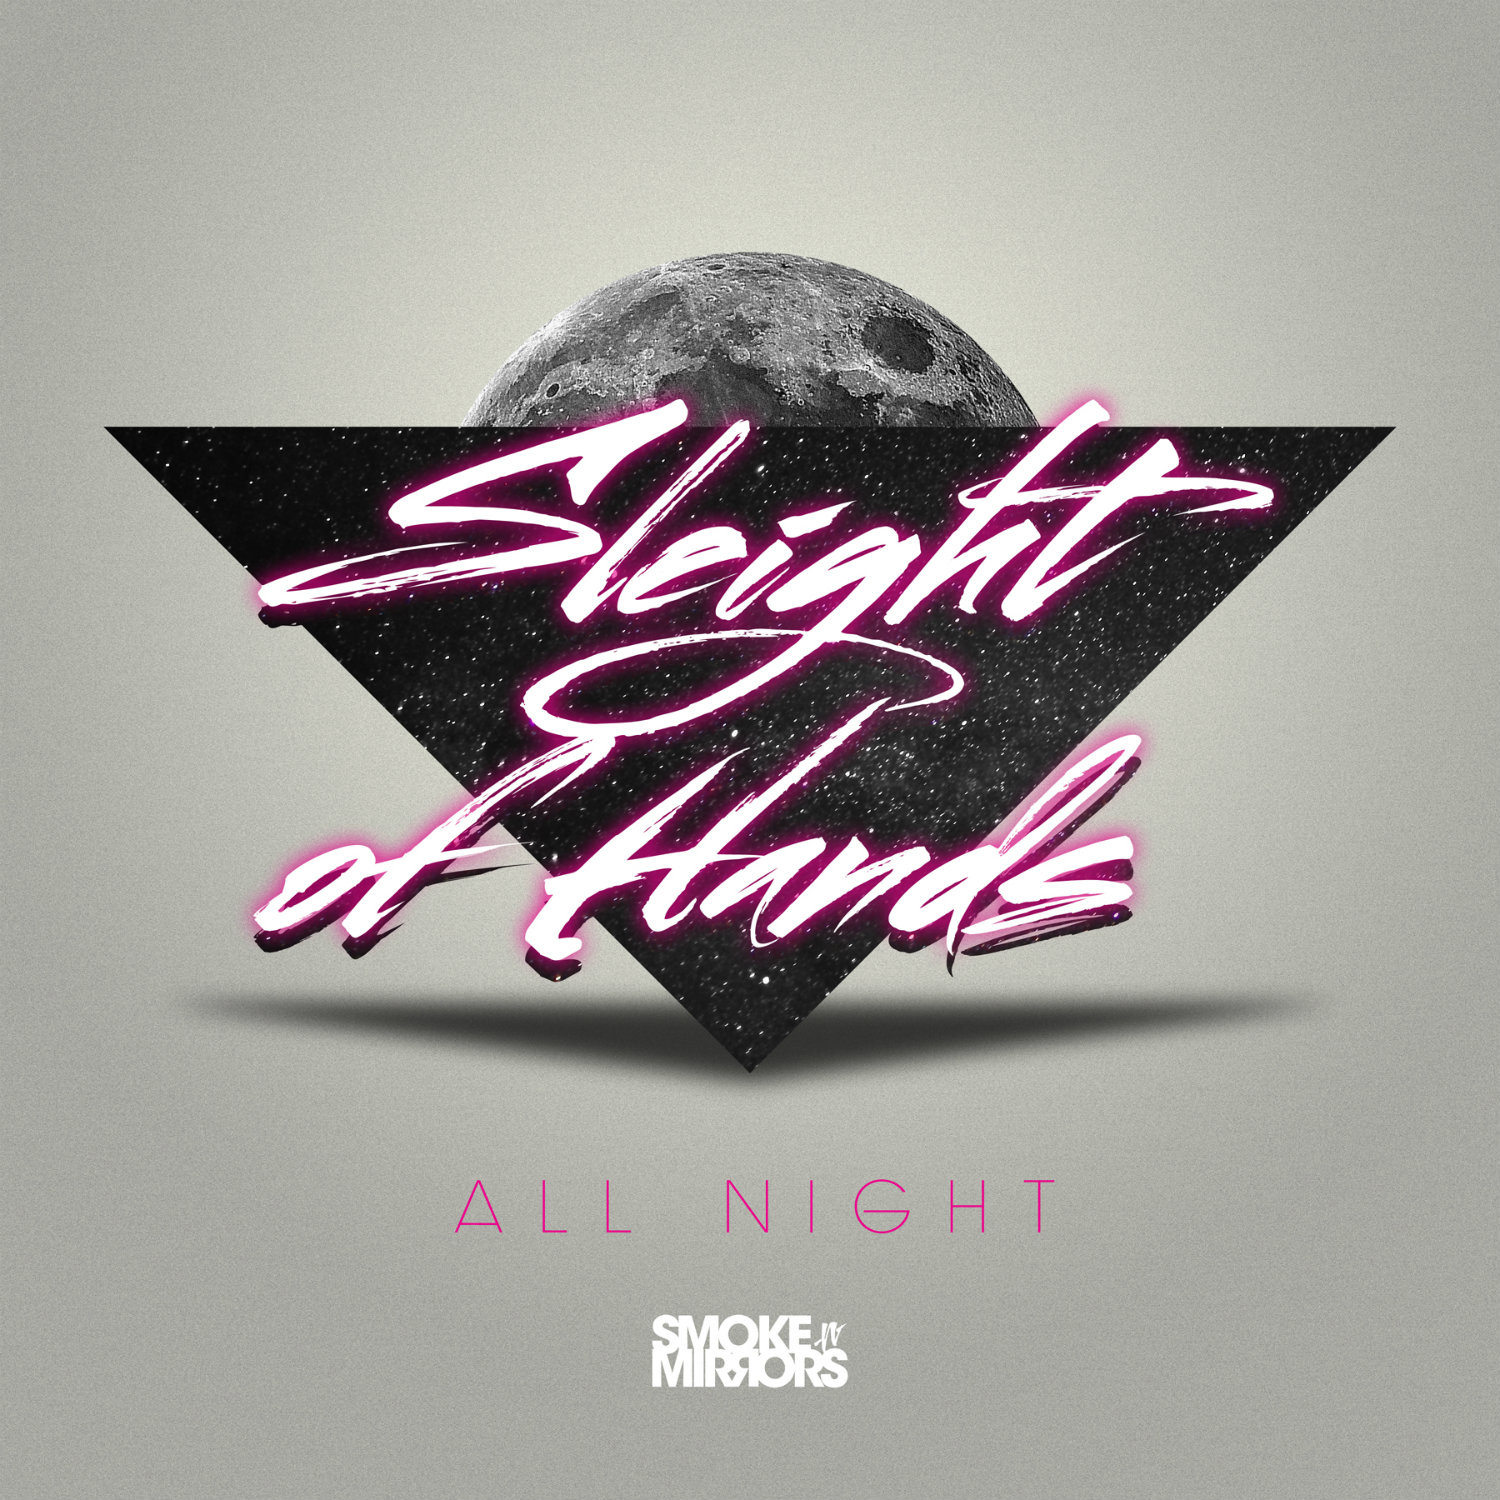 Night shakes. All Night. Gorilla Lounge Music. Sleight of hand. L.O.L. Sleight all Day.